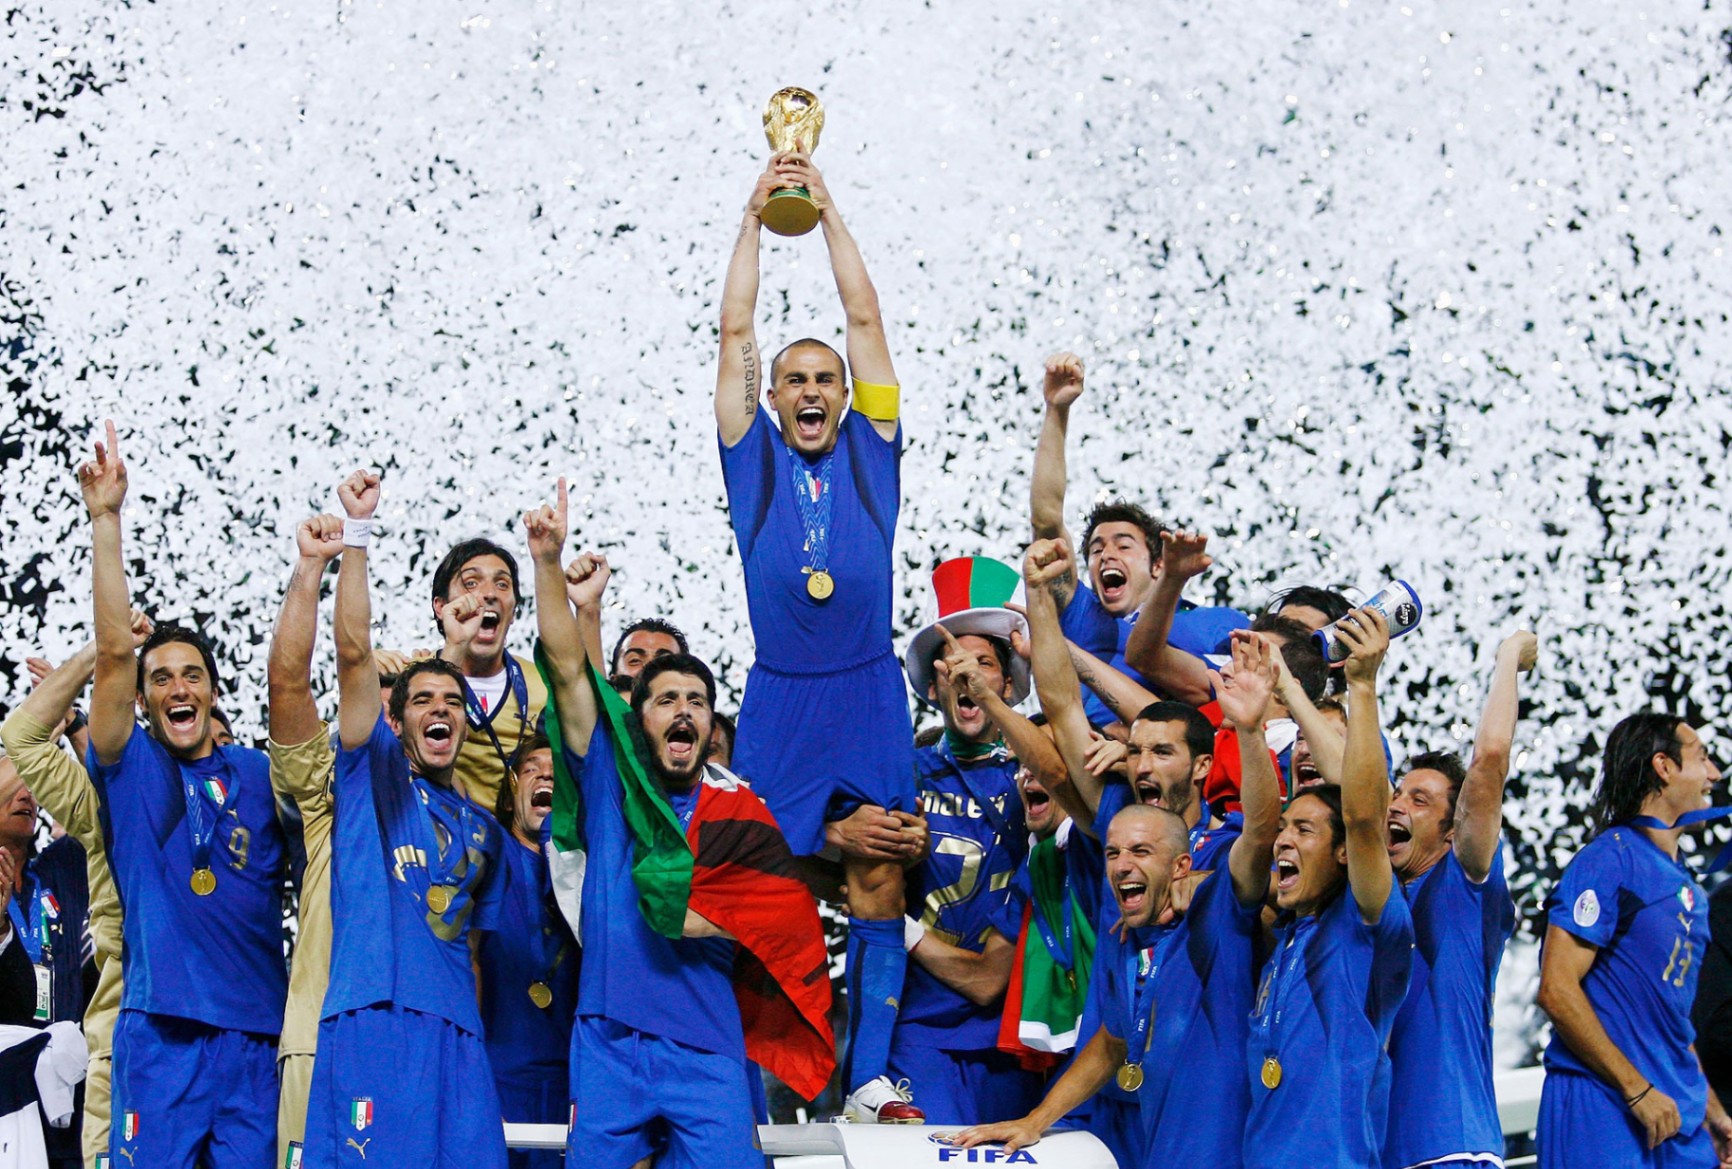 10 Fun Facts About the World Cup